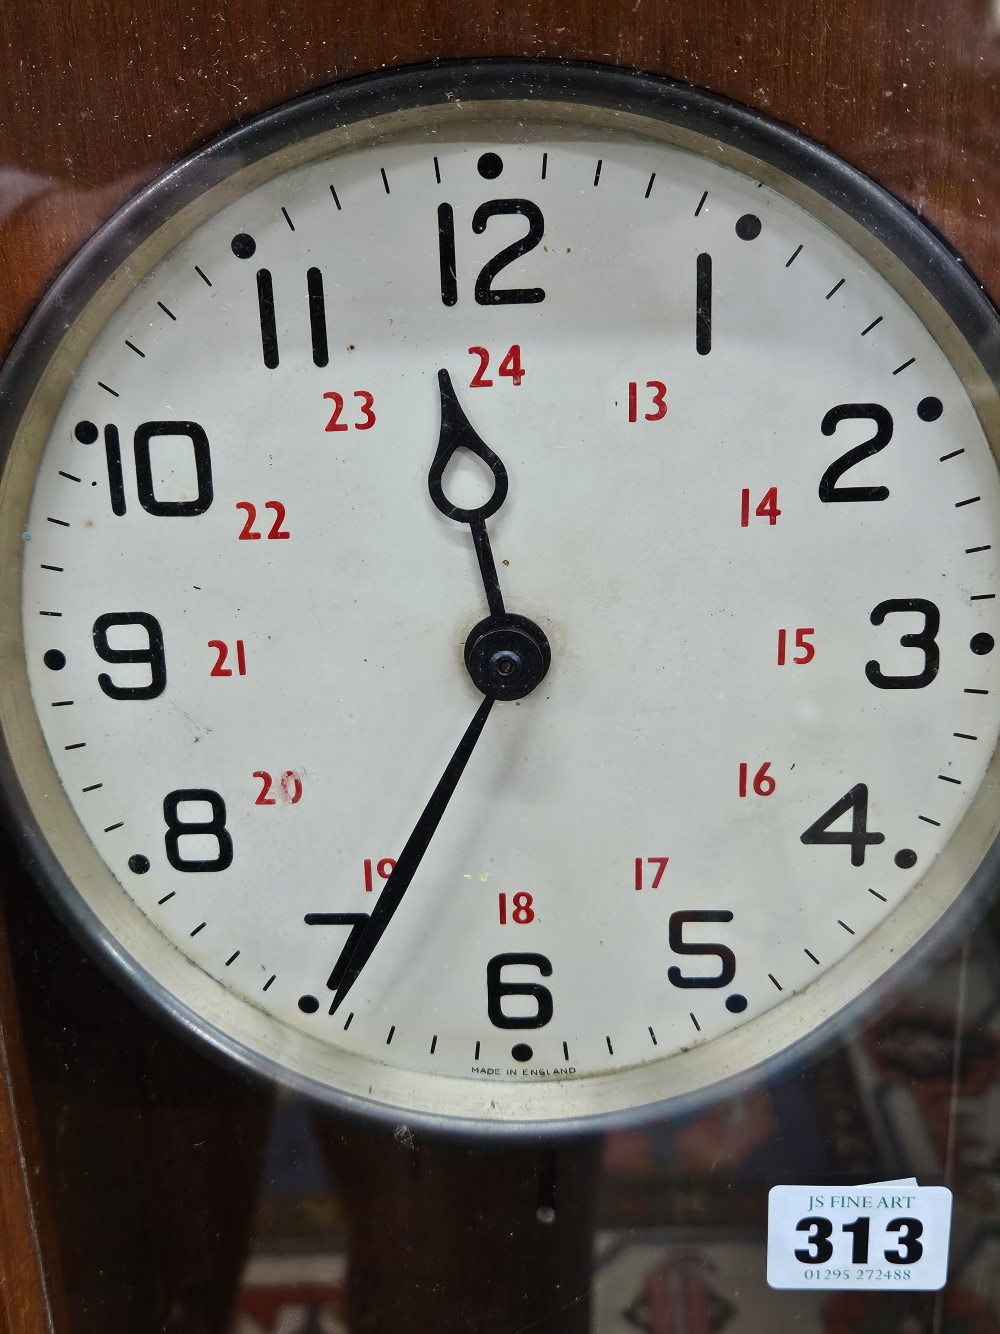 A GENT OF LEICESTER ELECTRIC CLOCK IN A GLAZED MAHOGANY CASE. H 134cms. - Image 6 of 6